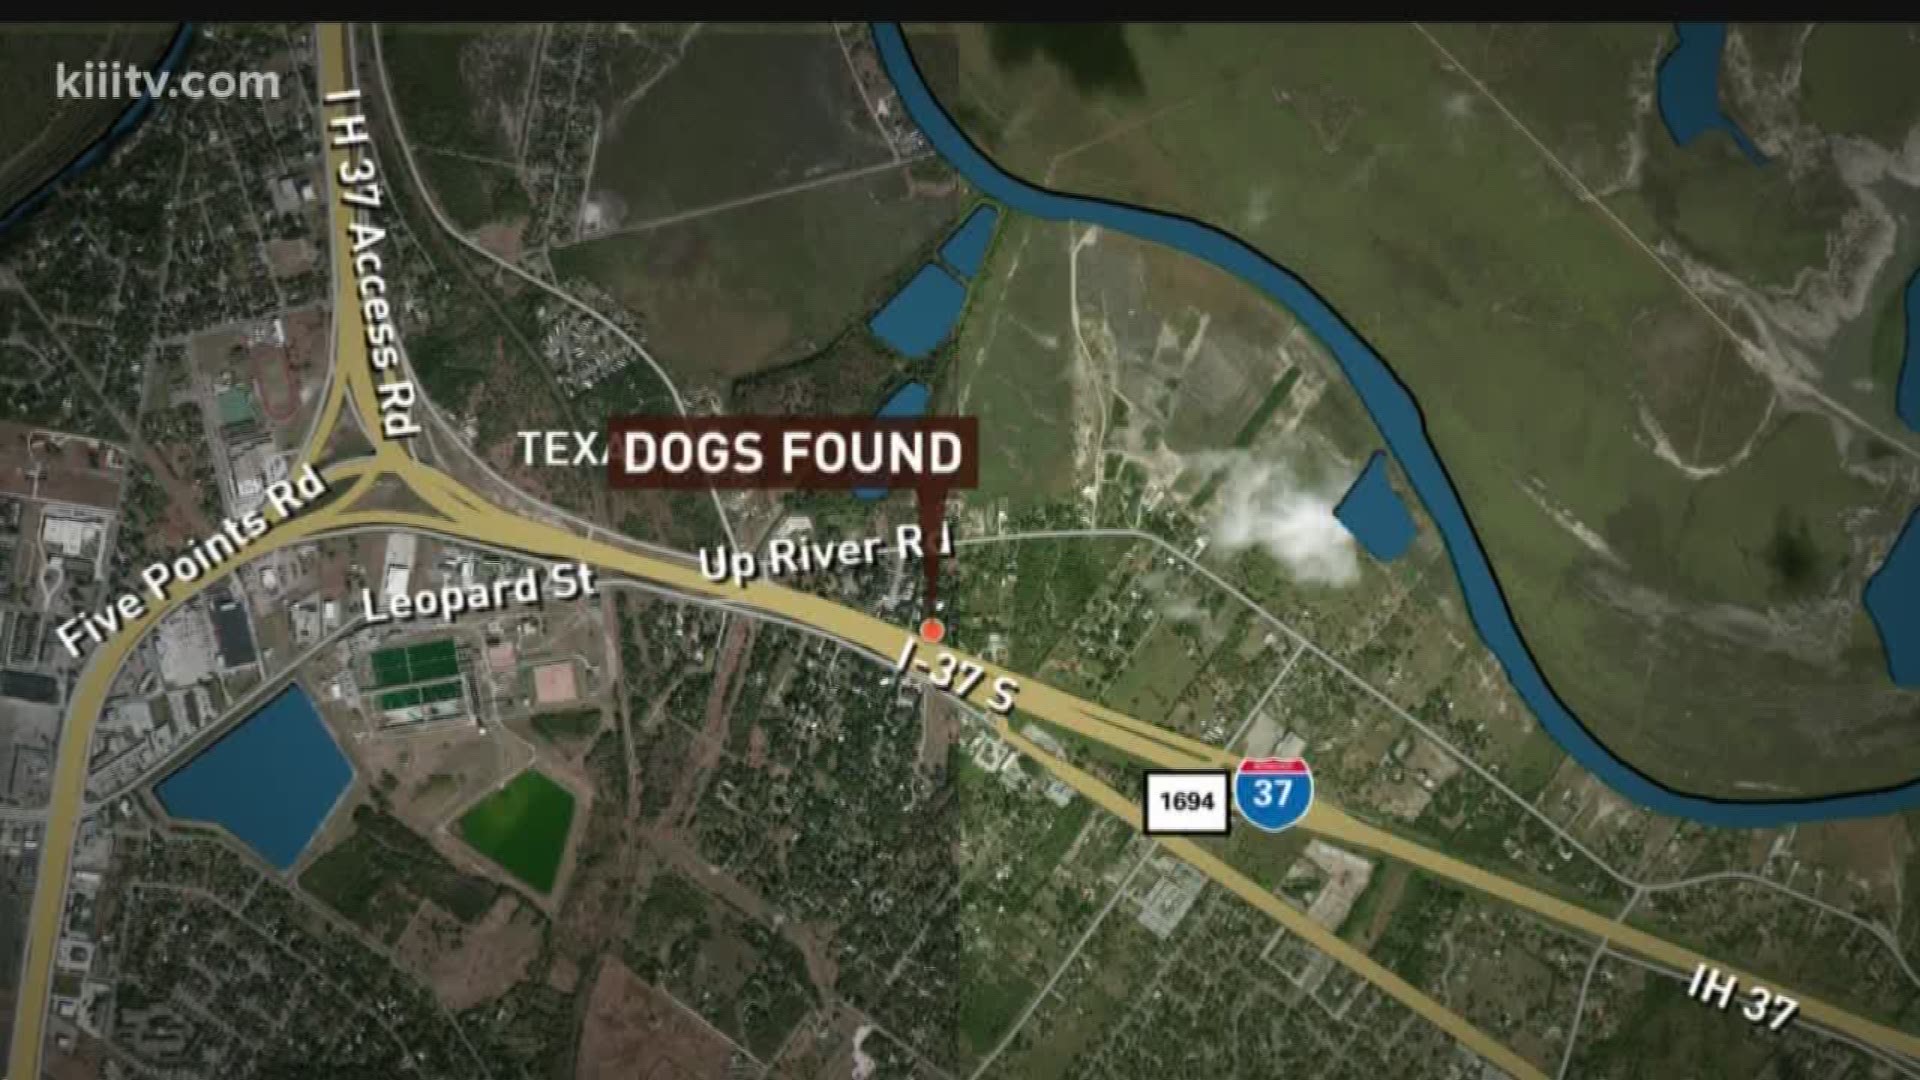 Police discovered seven dogs under a tree around 8:30 a.m Monday and the animals had no collars or tags.